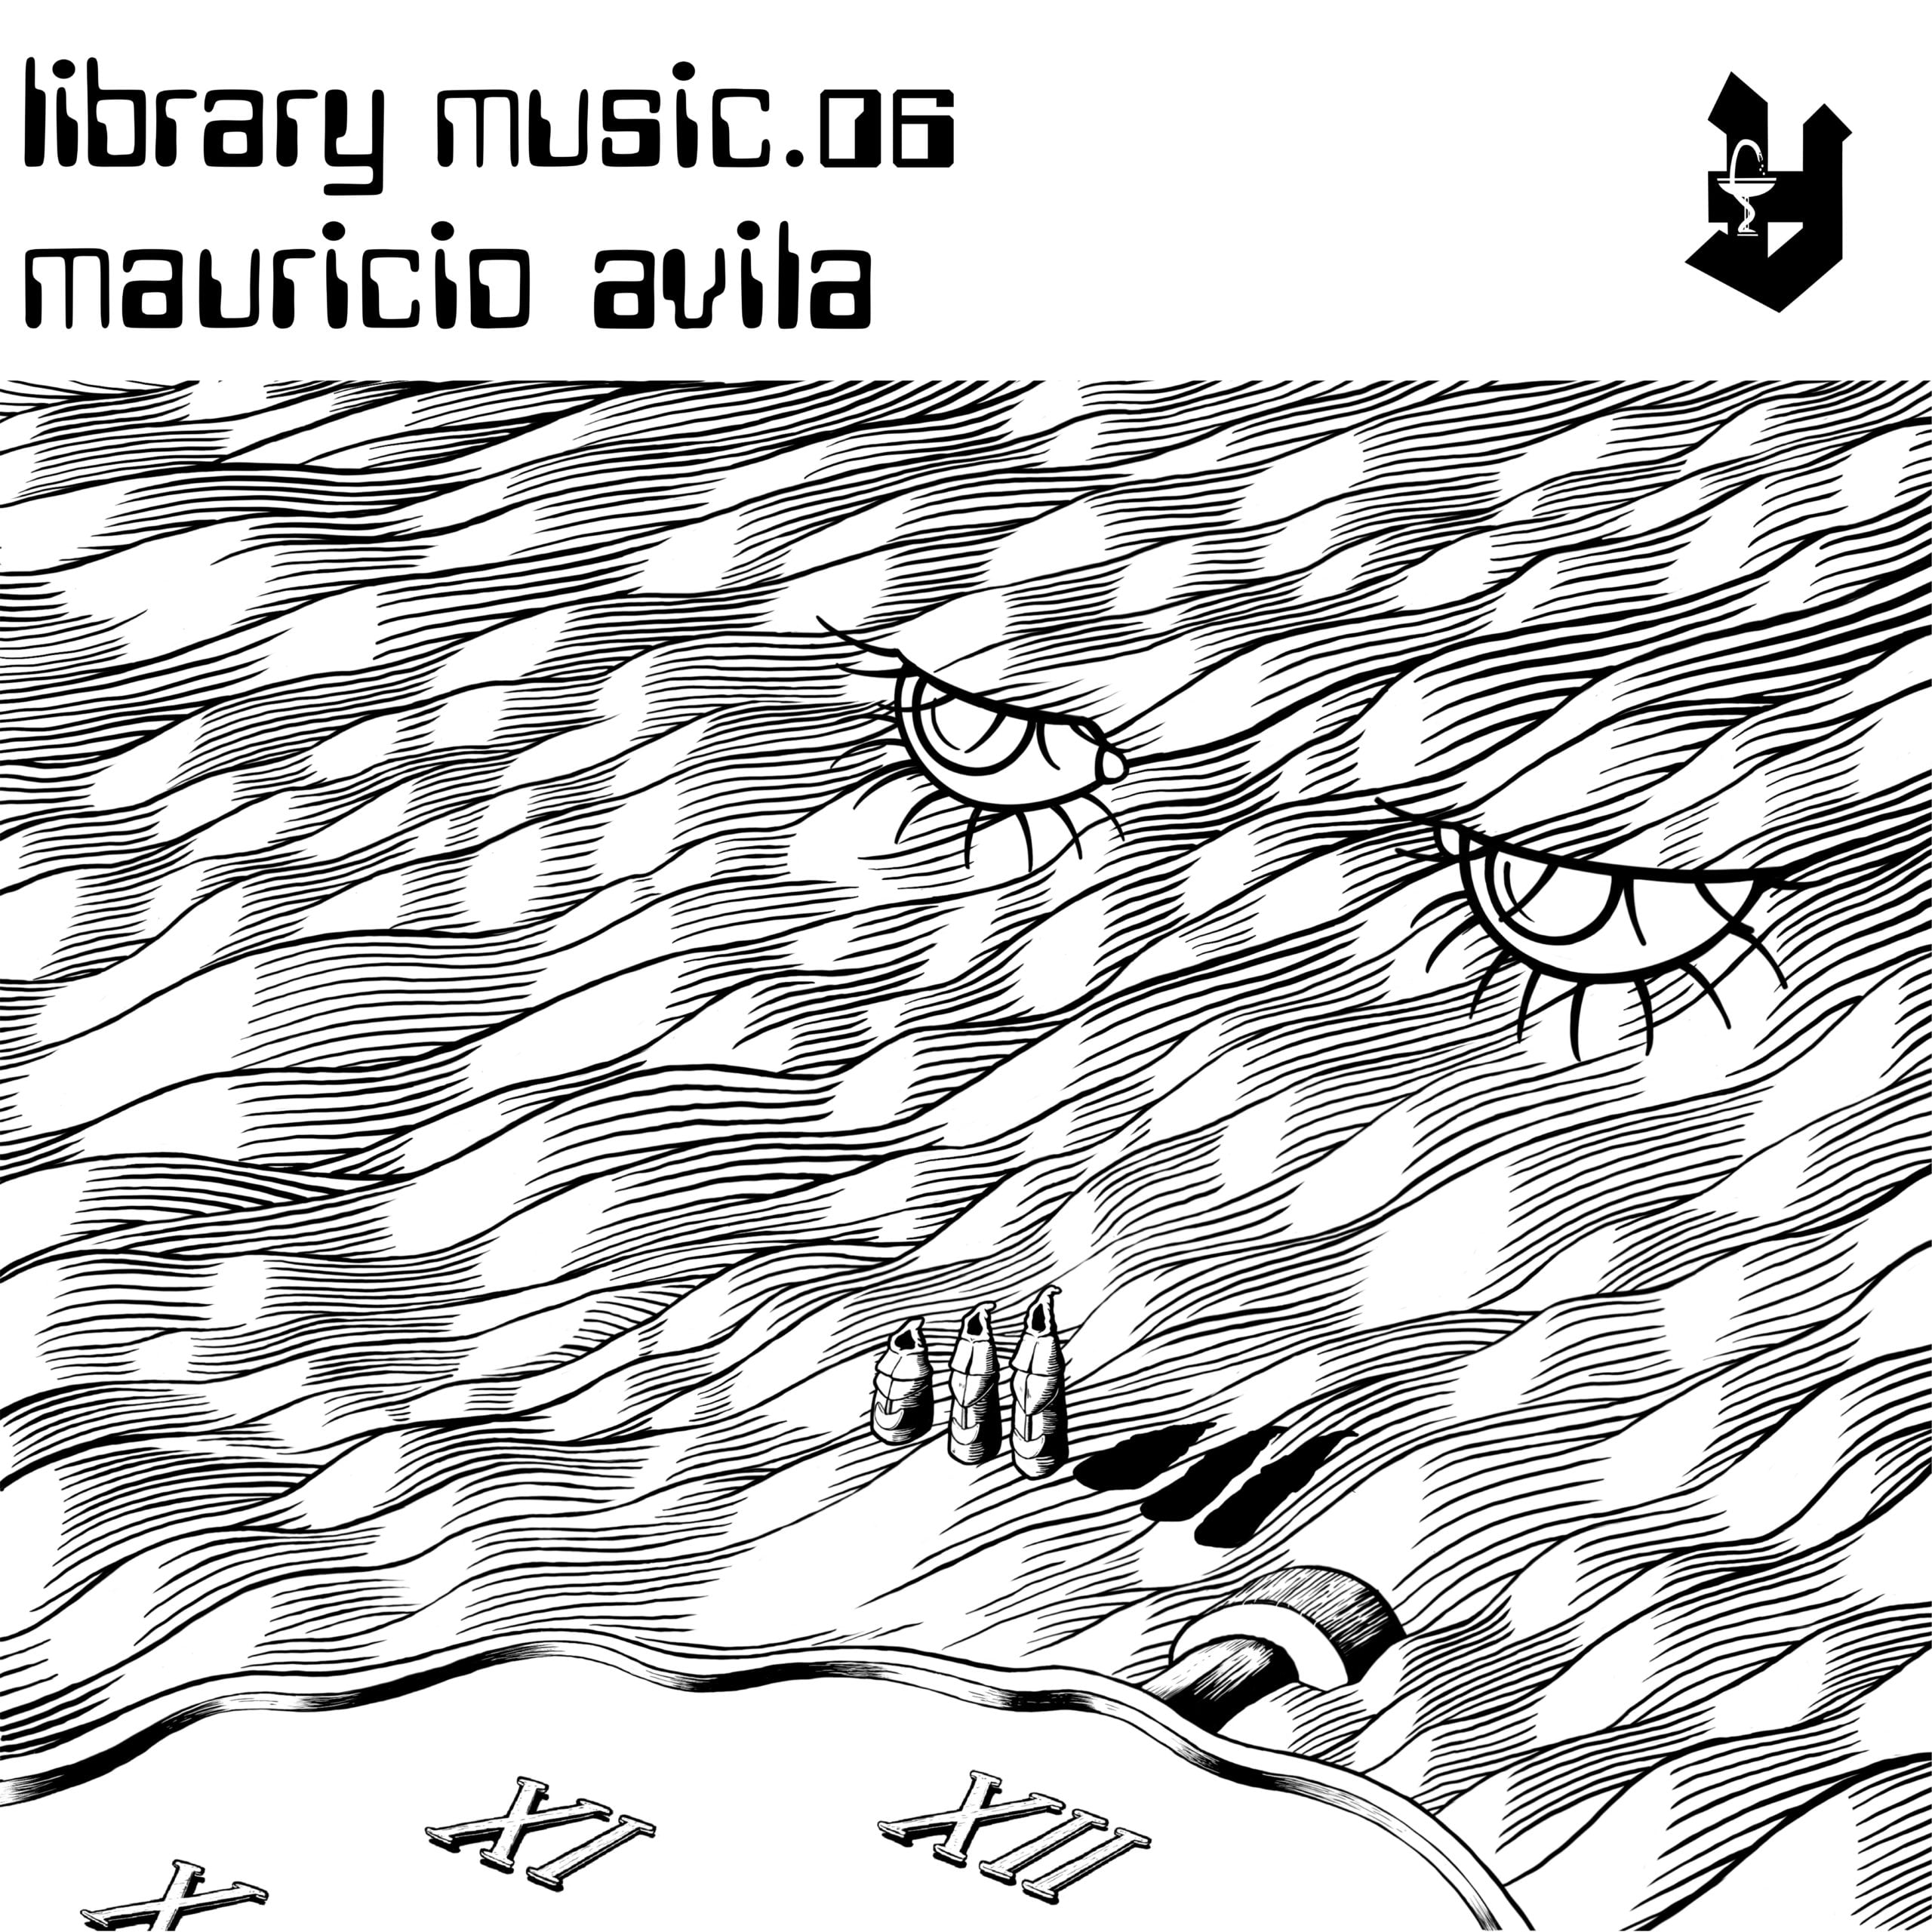 Library Music